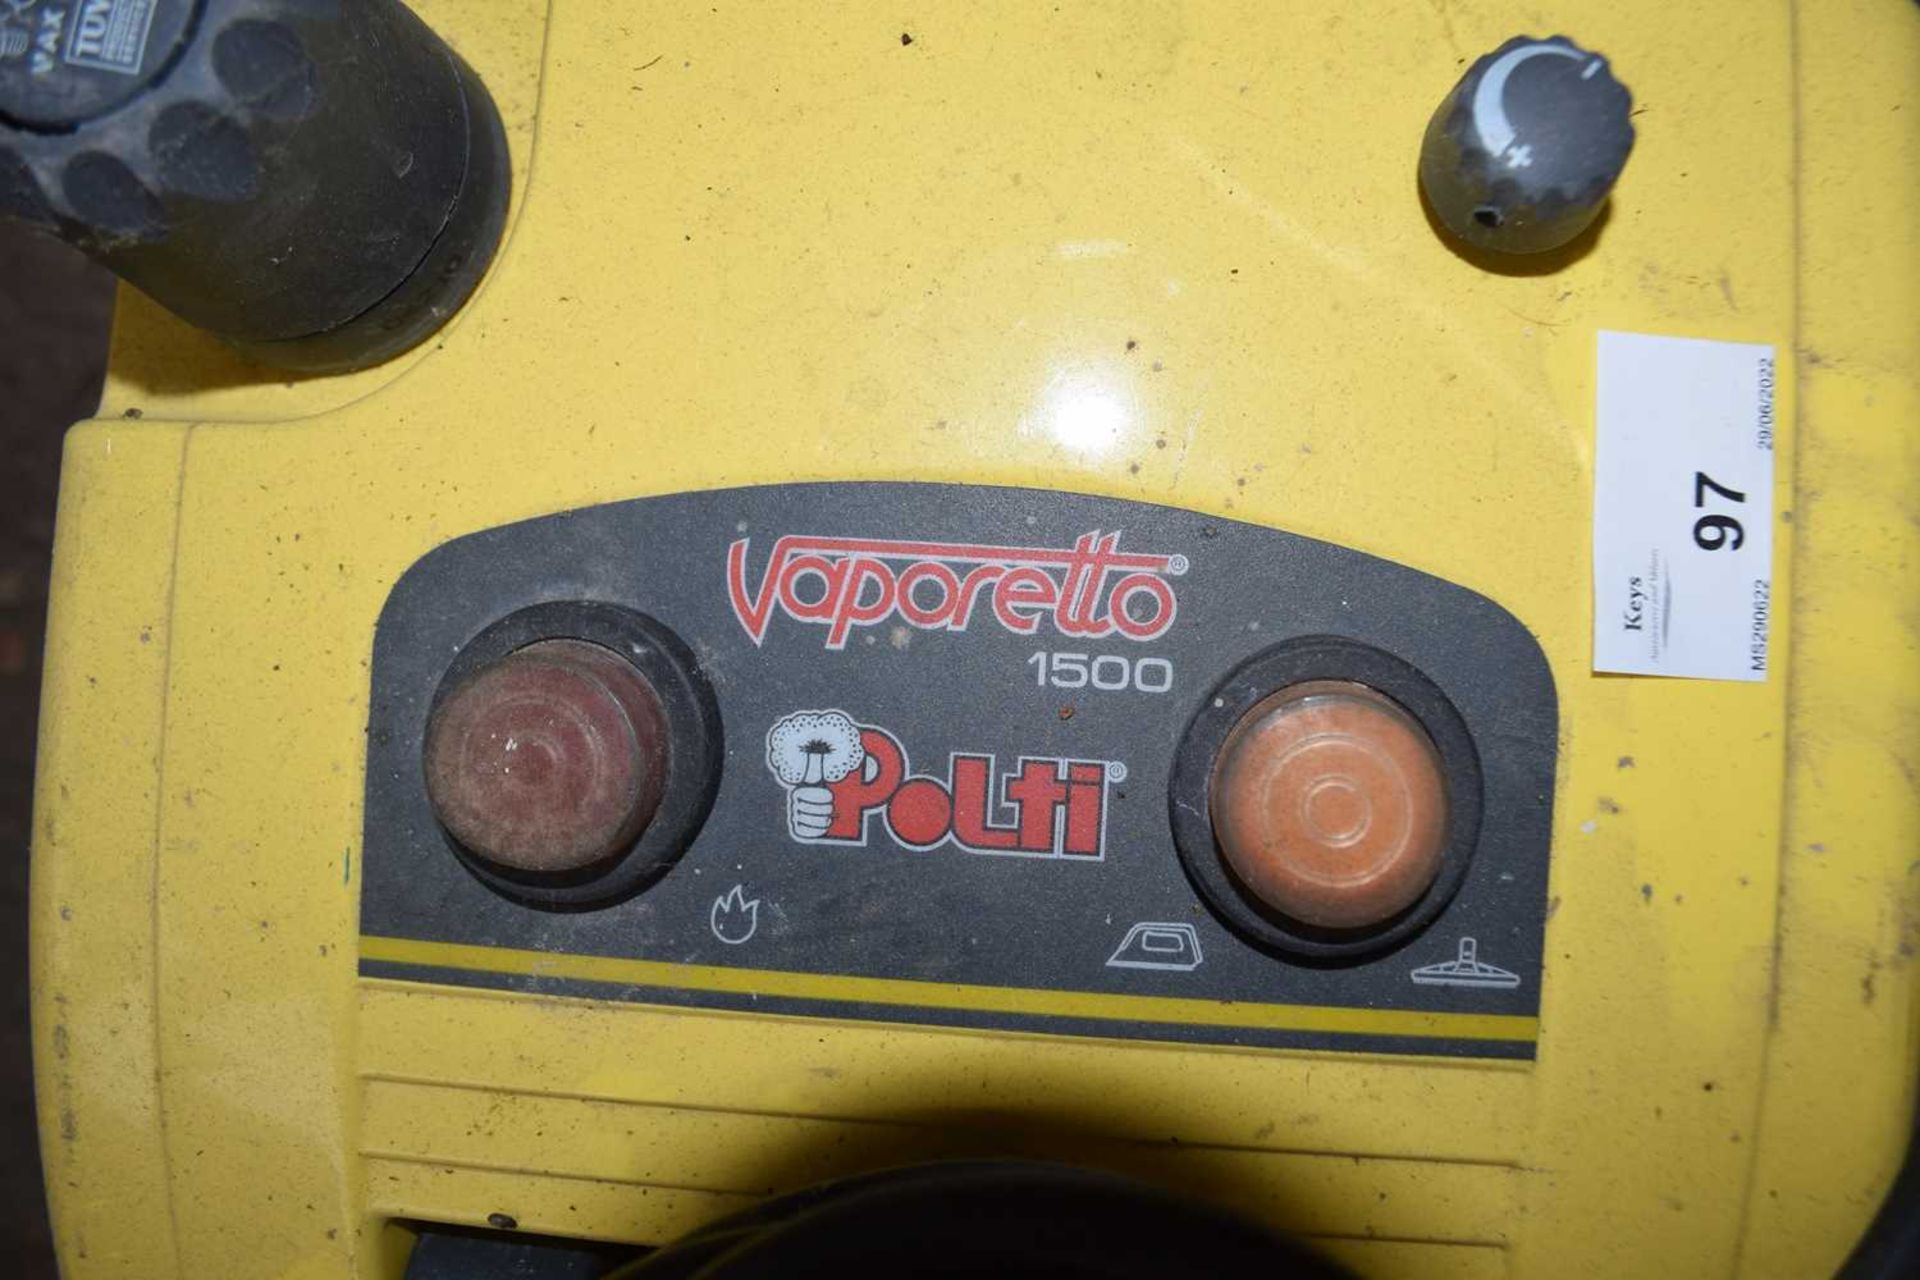 Vaporetto 1500 by Polti steamer - Image 2 of 2